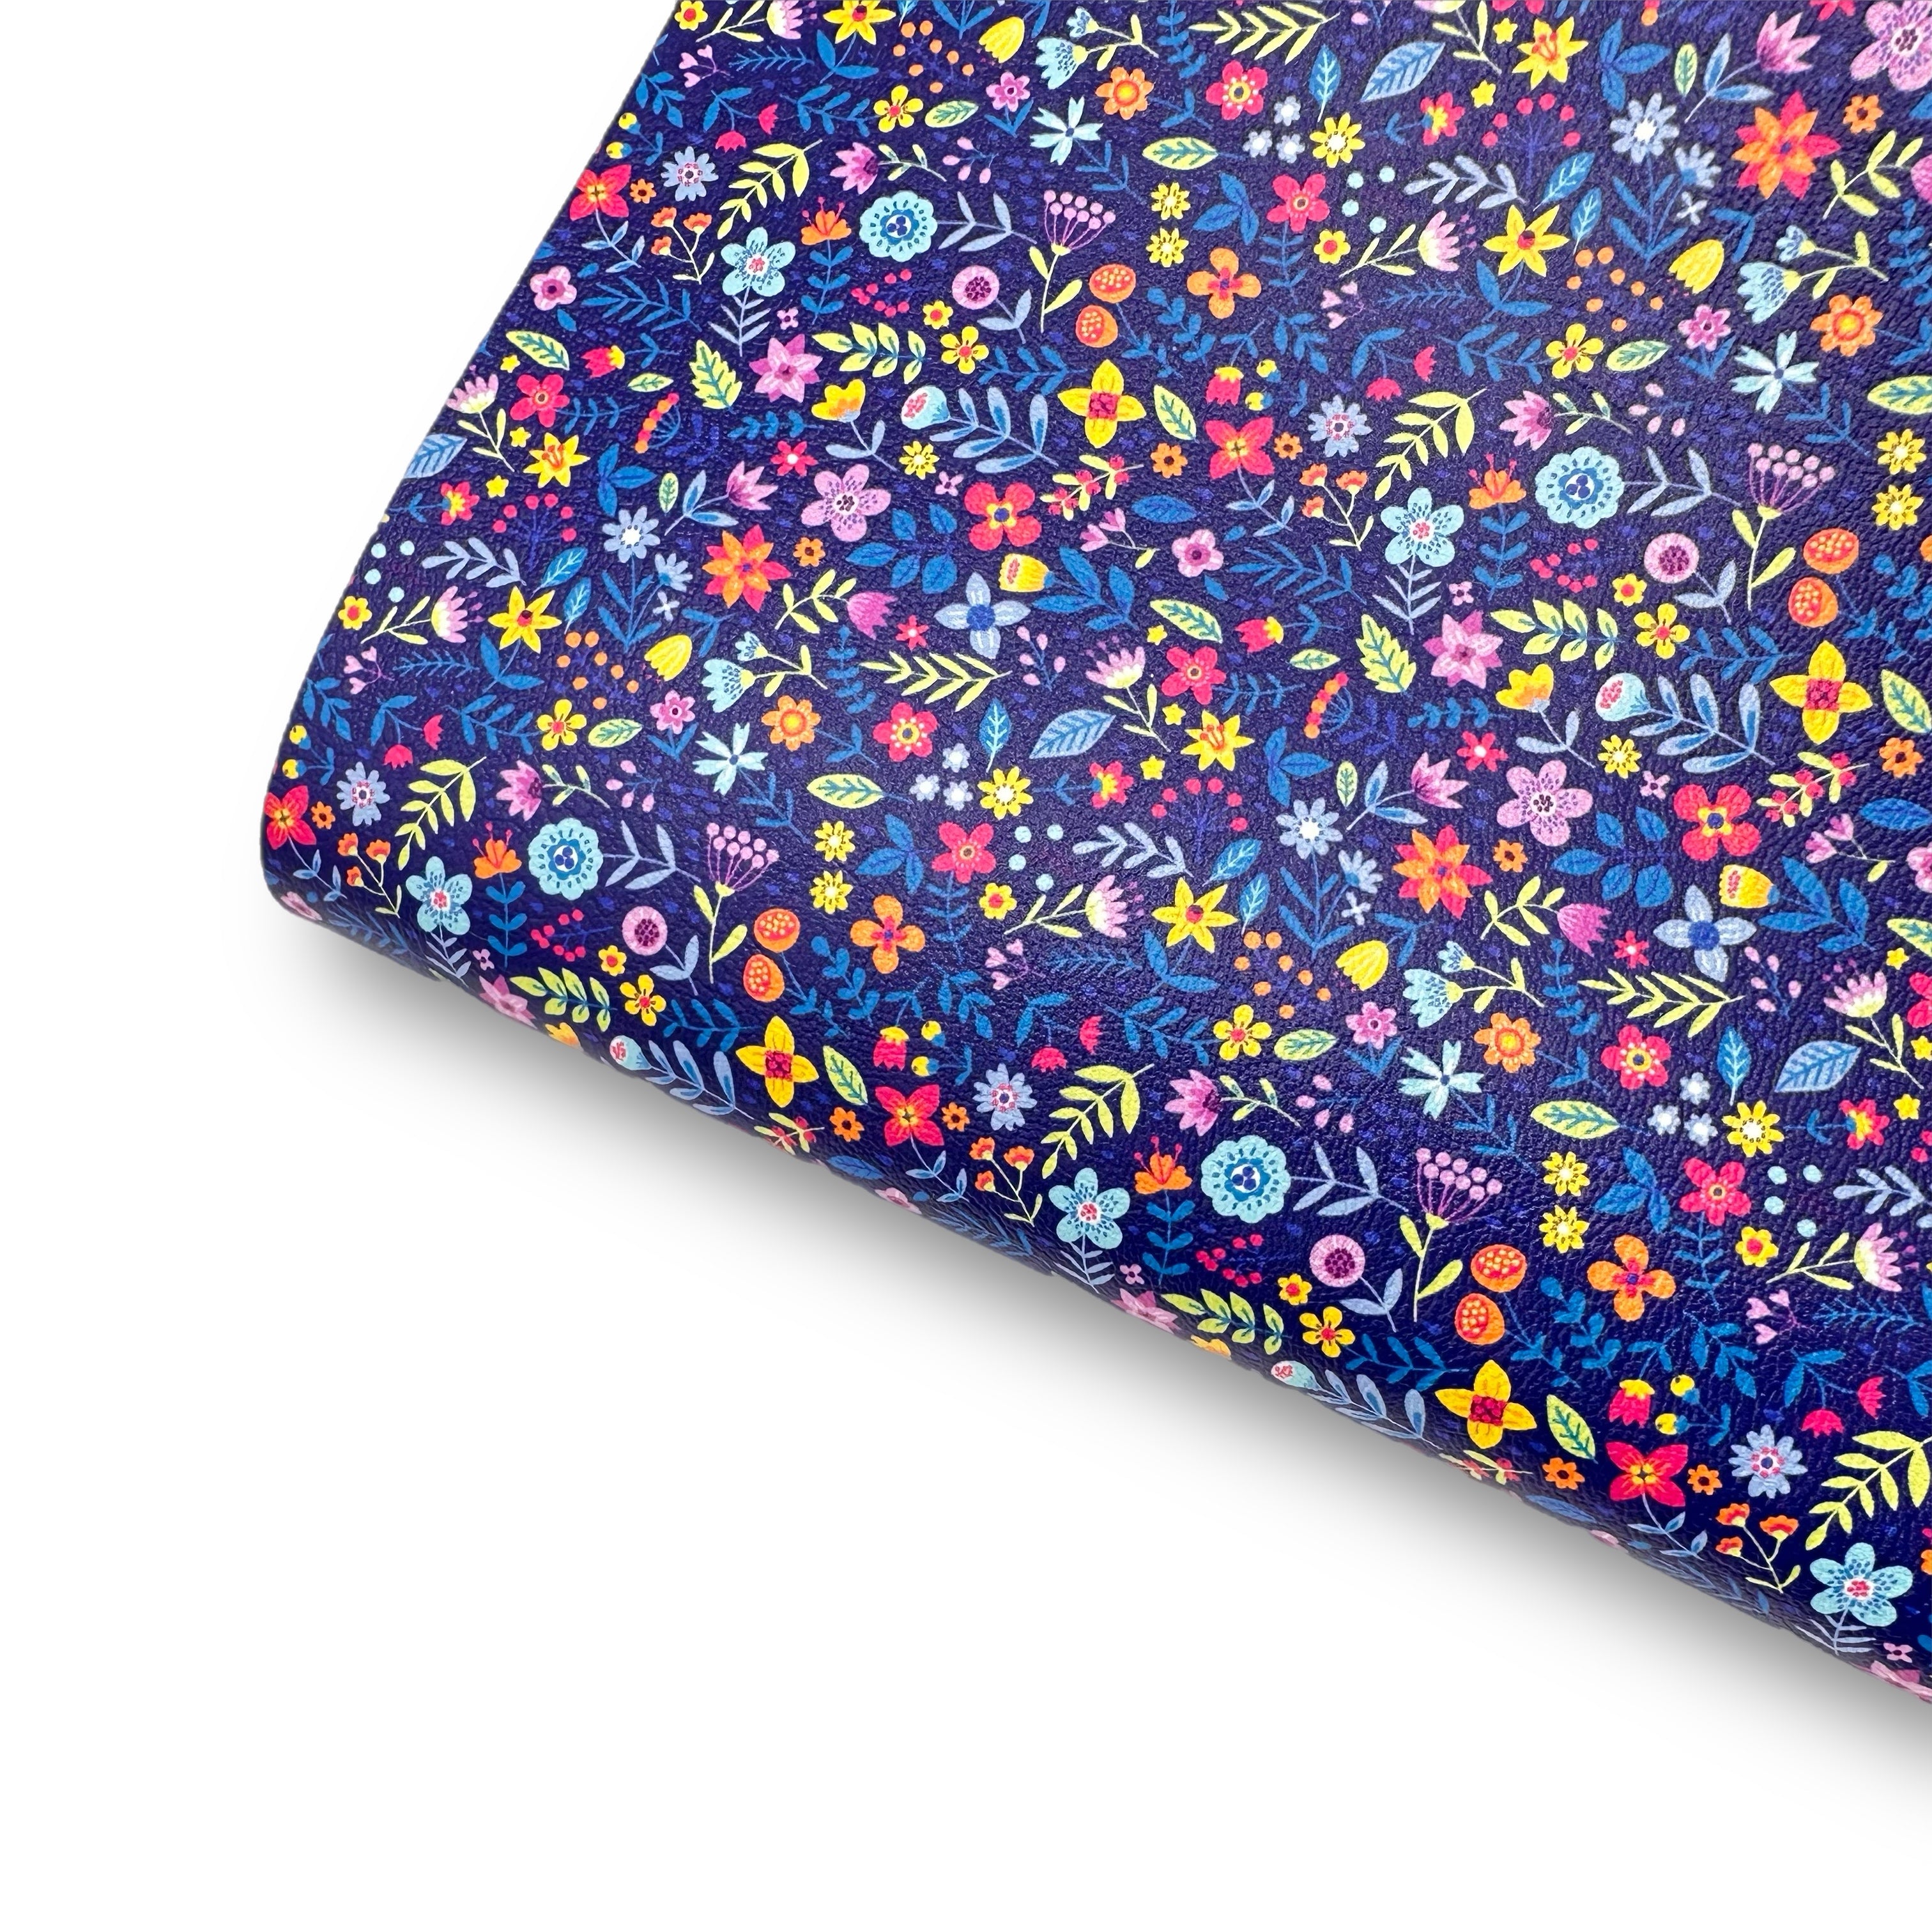 Navy Ditsy Florals Premium Faux Leather Fabric